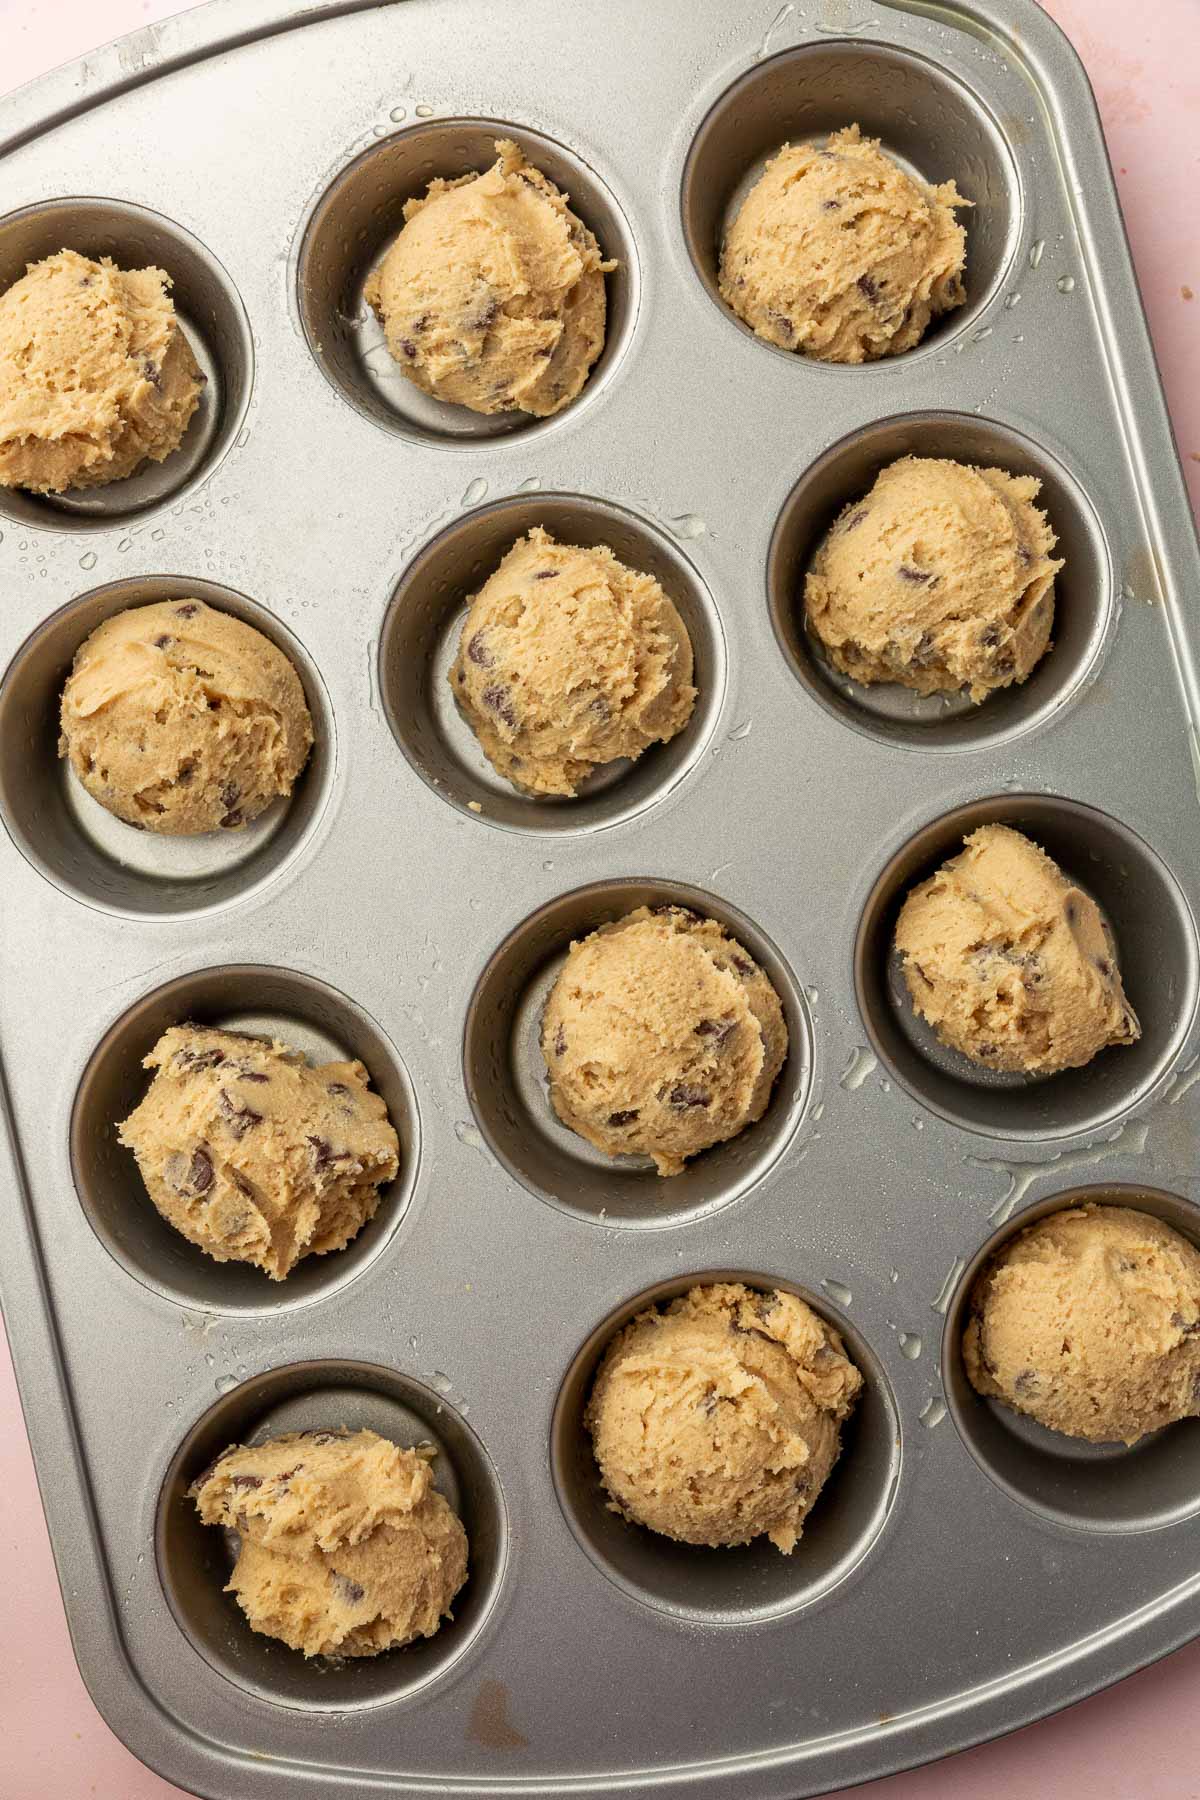 A muffin tin that has scoops of gluten-free chocolate chip cookie dough in the center of each muffin well before baking in the oven.